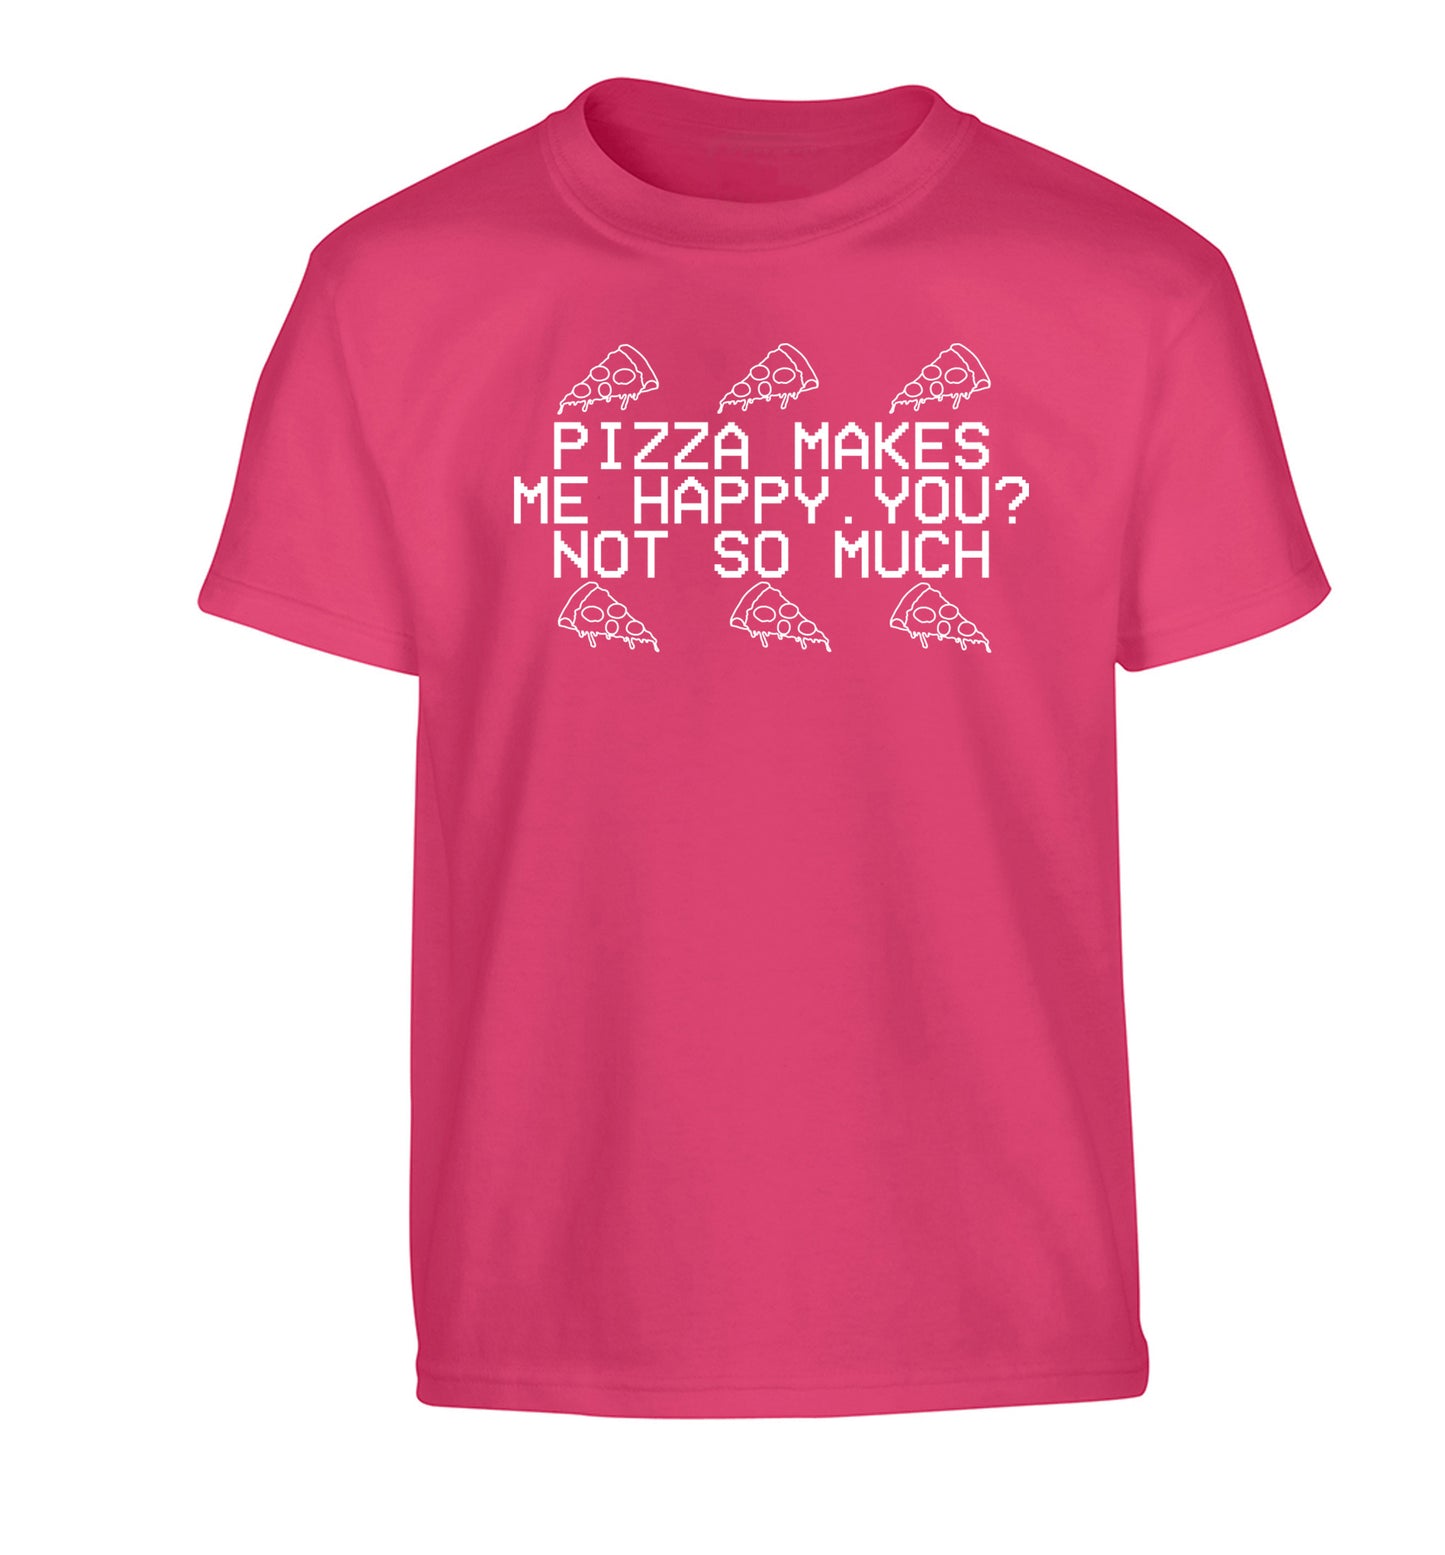 Pizza makes me happy, You? Not so much Children's pink Tshirt 12-14 Years